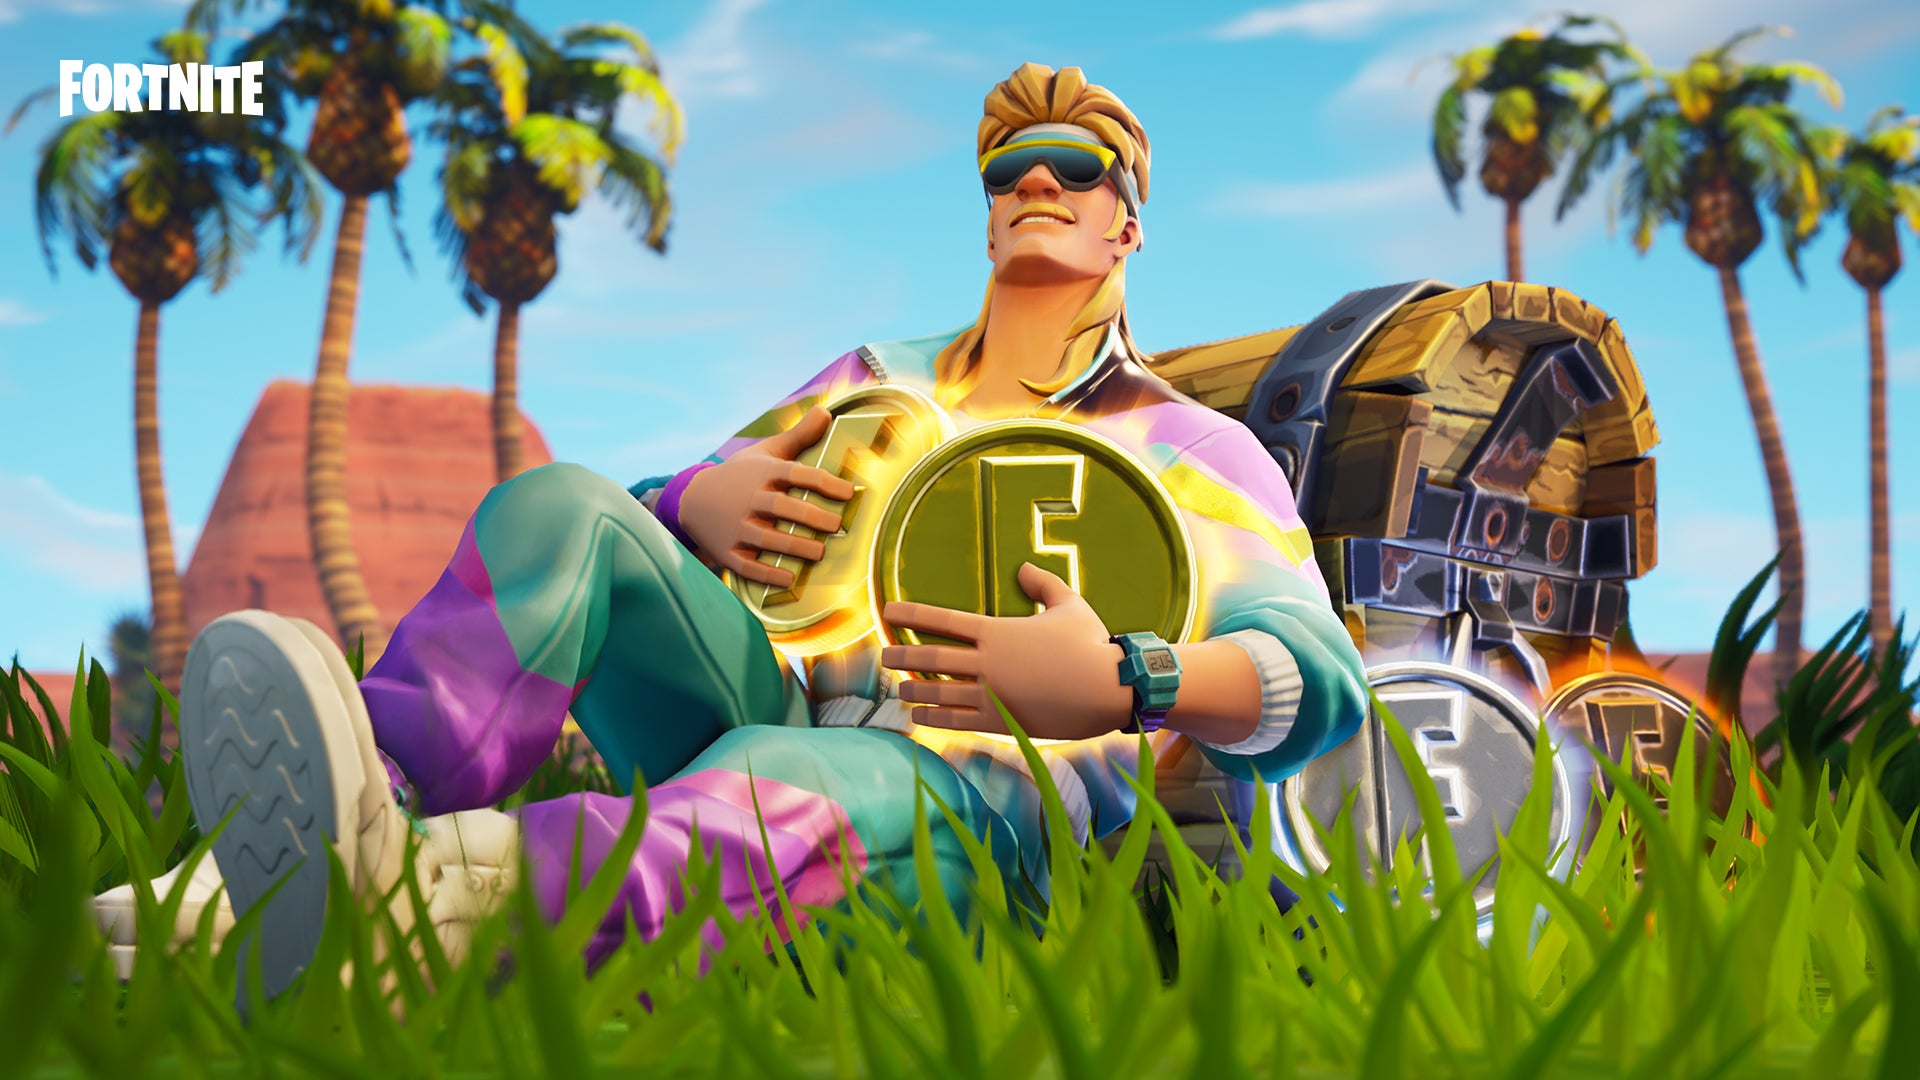 Image for Fortnite had its biggest month yet in August with 78.3 million players